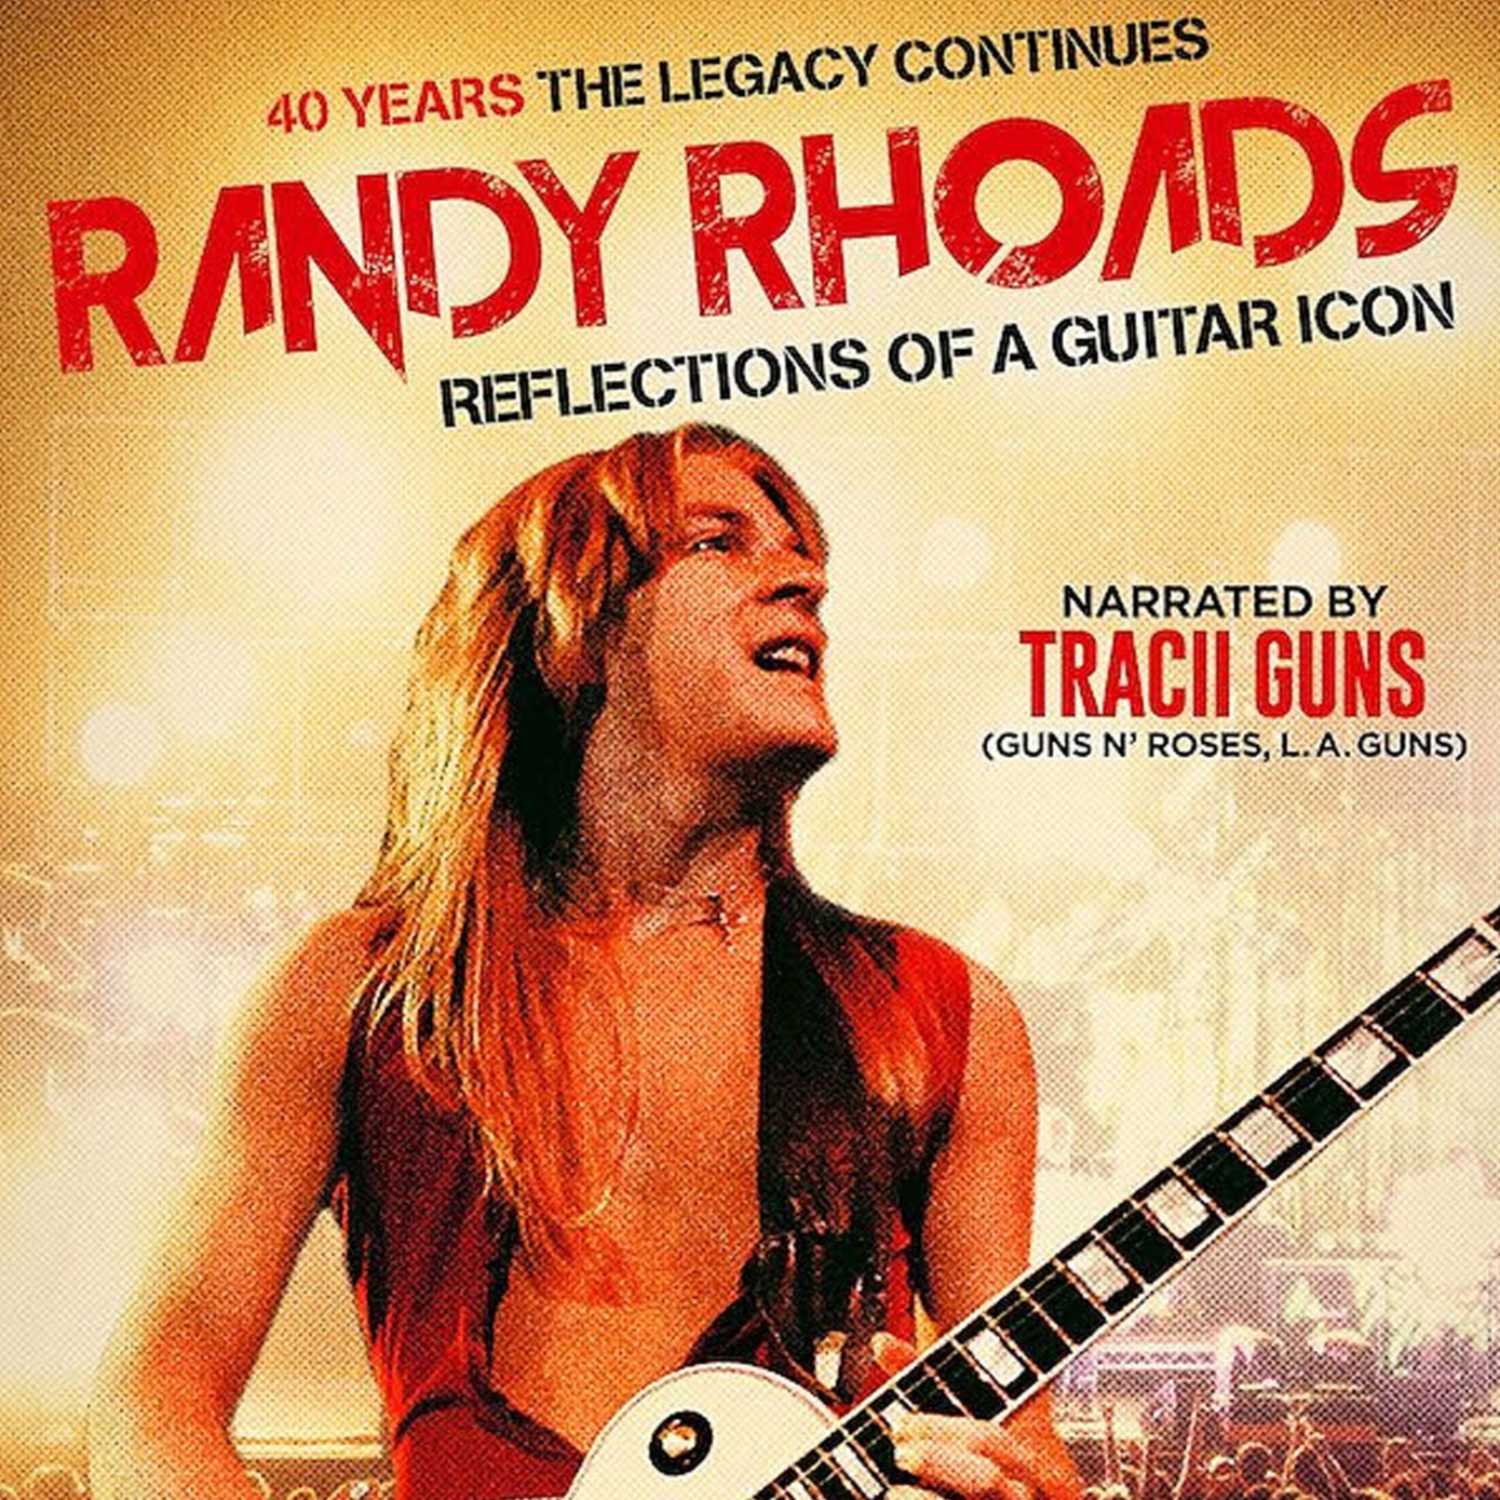 Andre Relis  Tracii Guns Randy Rhoads Reflections of a Guitar Icon